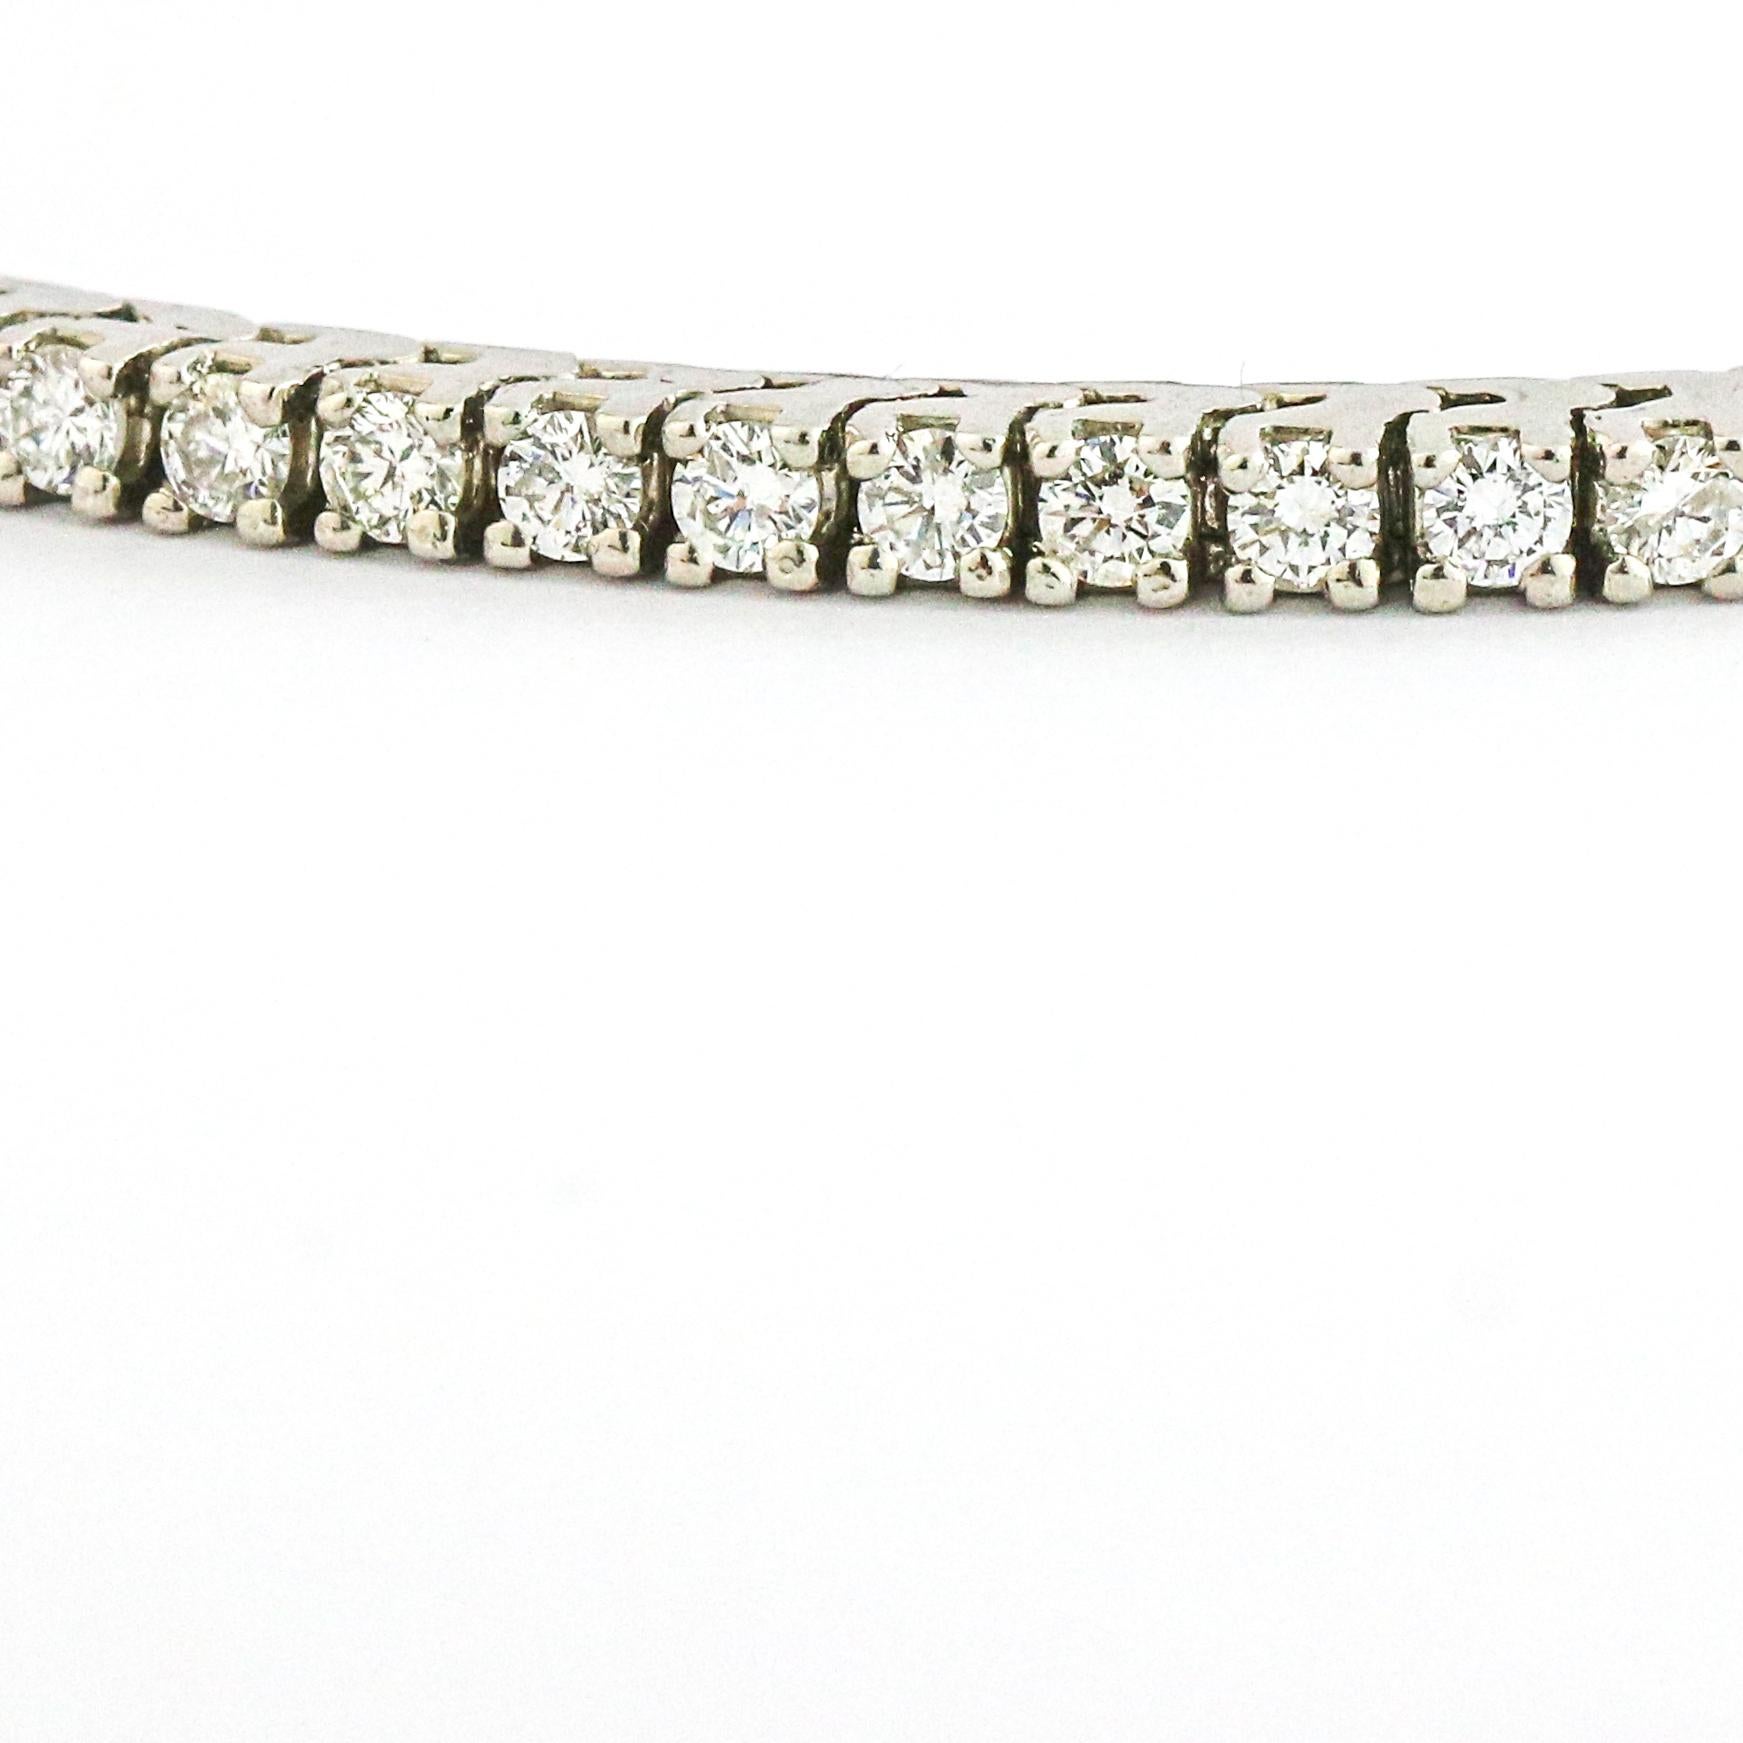 Classic tennis bracelet in platinum with 3 carats of natural round-cut diamonds. Slide clasp with safety. Diamonds: H-I color, VS-SI clarity. Size medium, fits a wrist up to 6.75 inches. The bracelet is 7 inches long.
